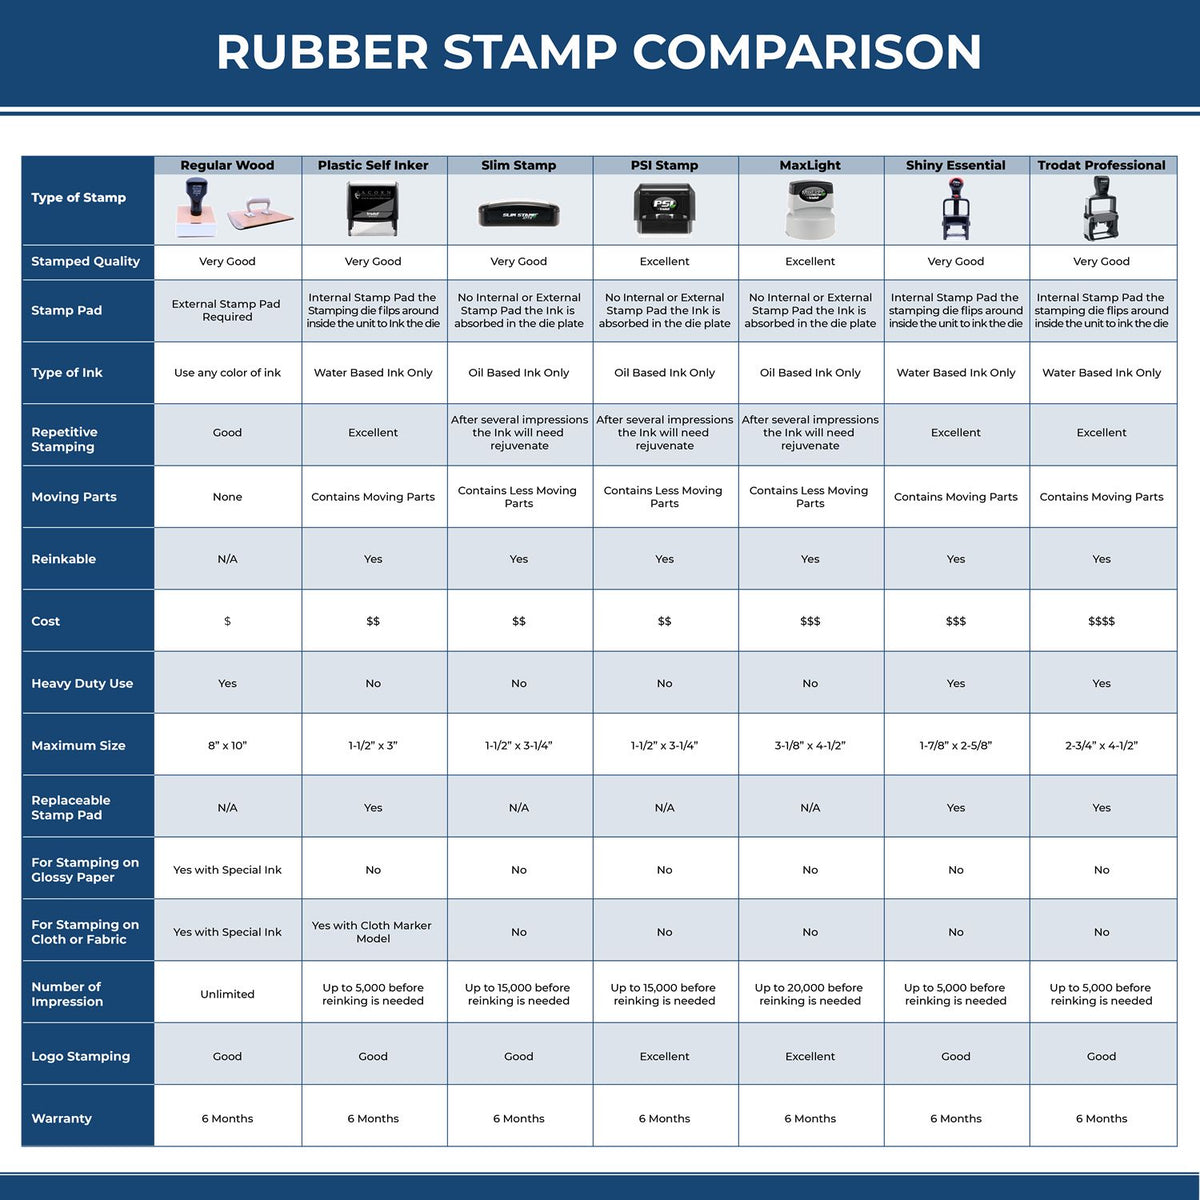 A comparison chart for the different types of mount models available for the MaxLight Premium Pre-Inked Montana State Seal Notarial Stamp.